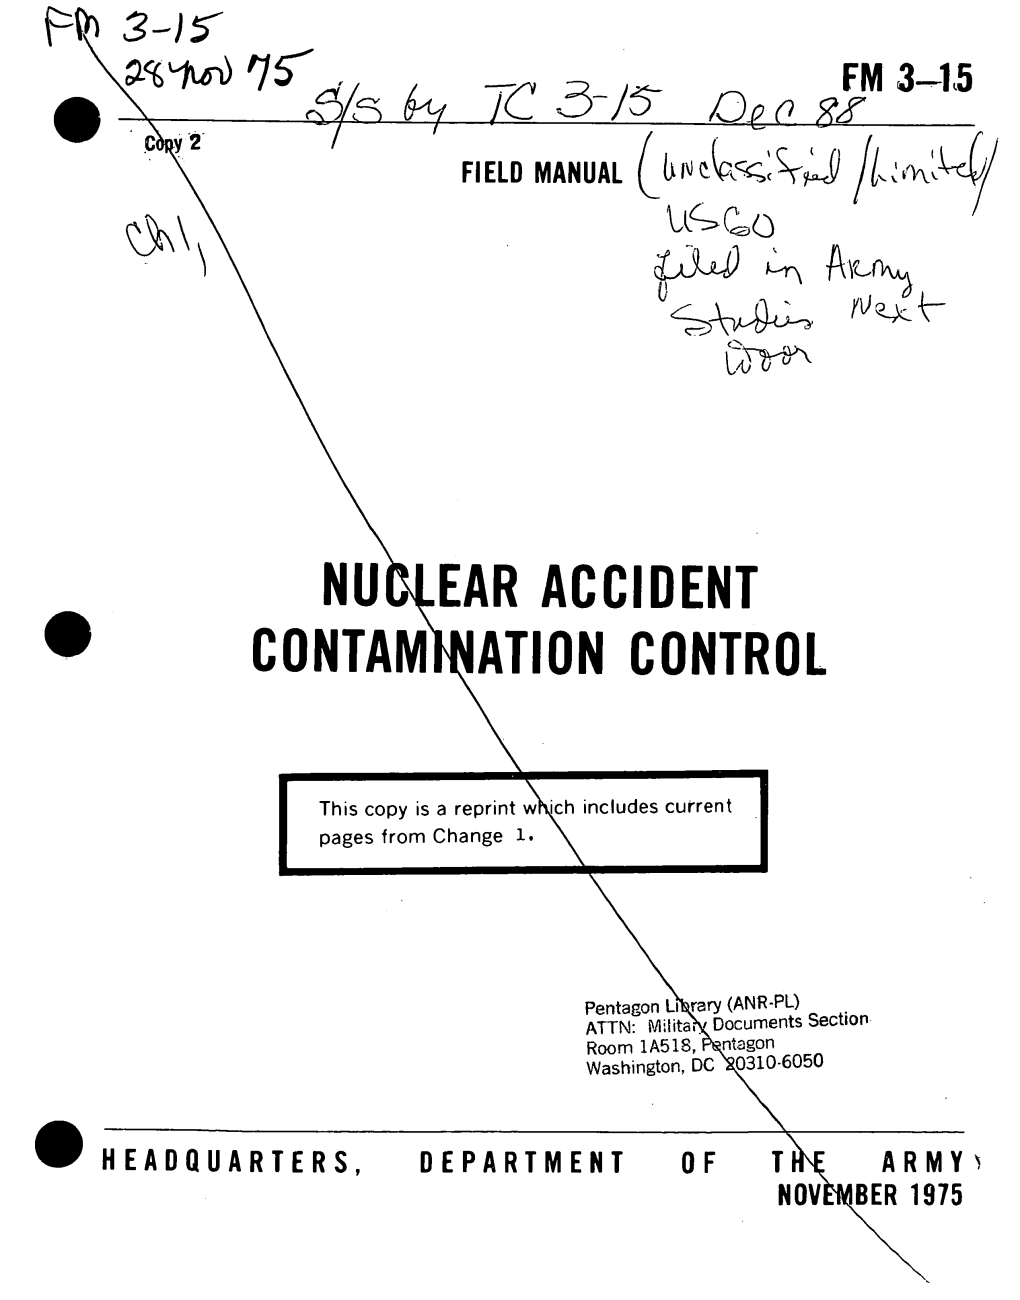 Nuclear Accident Contamination Control, 28 November 1975